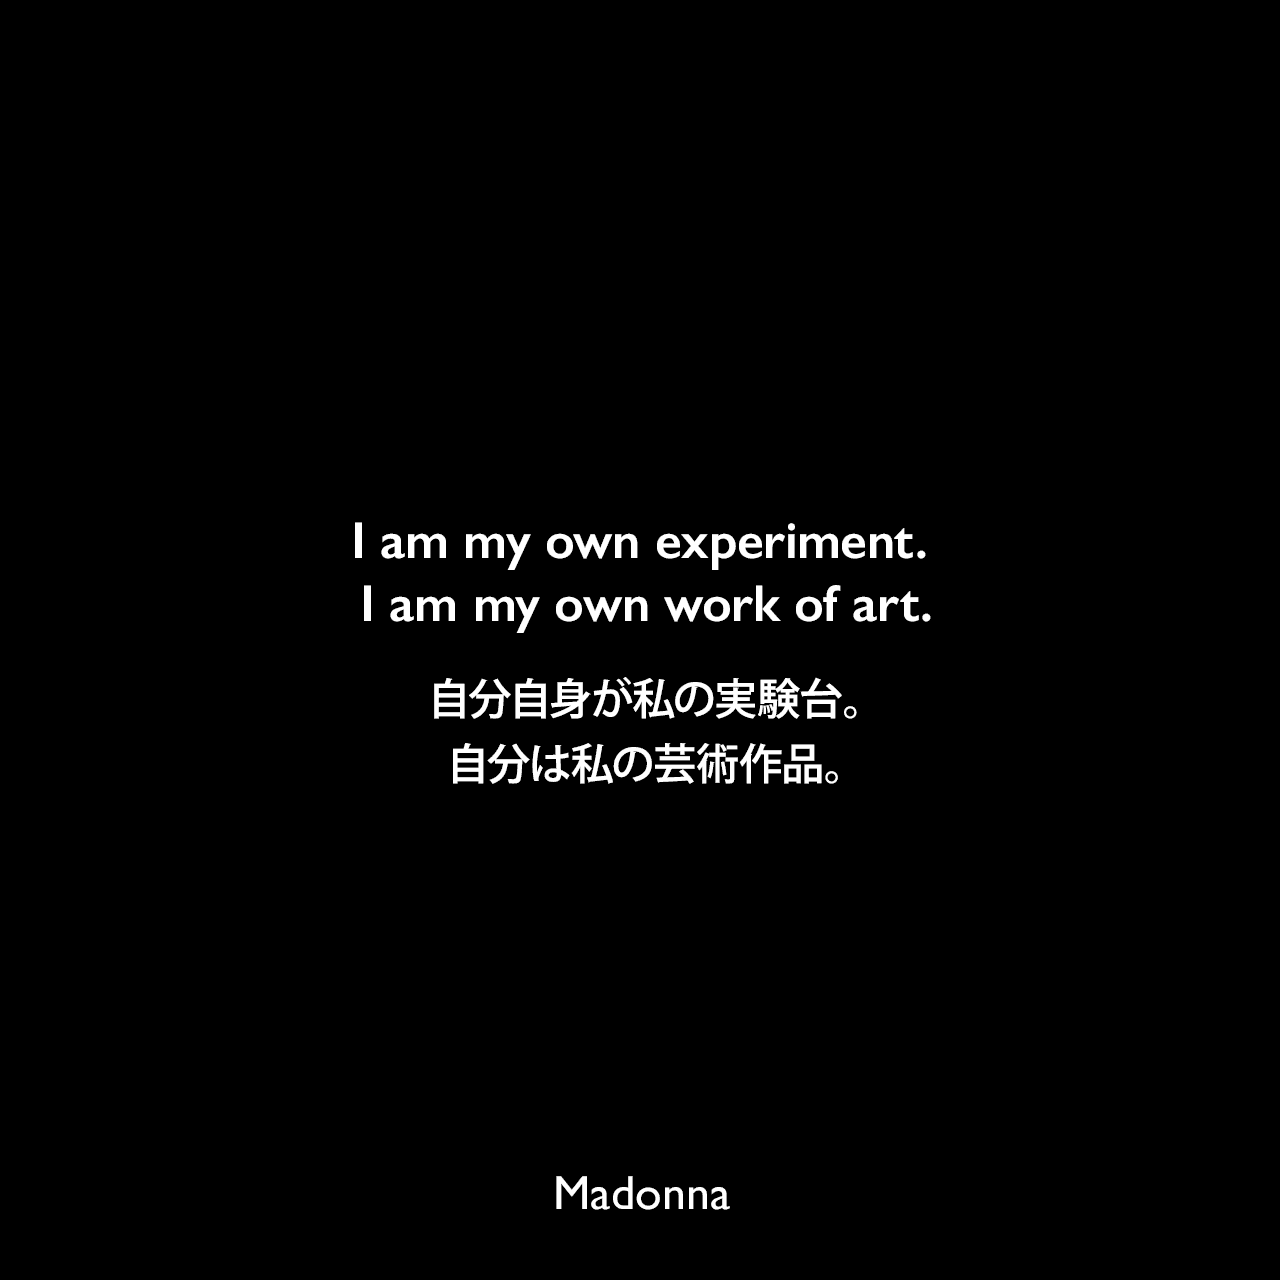 I am my own experiment. I am my own work of art.自分自身が私の実験台。自分は私の芸術作品。Madonna